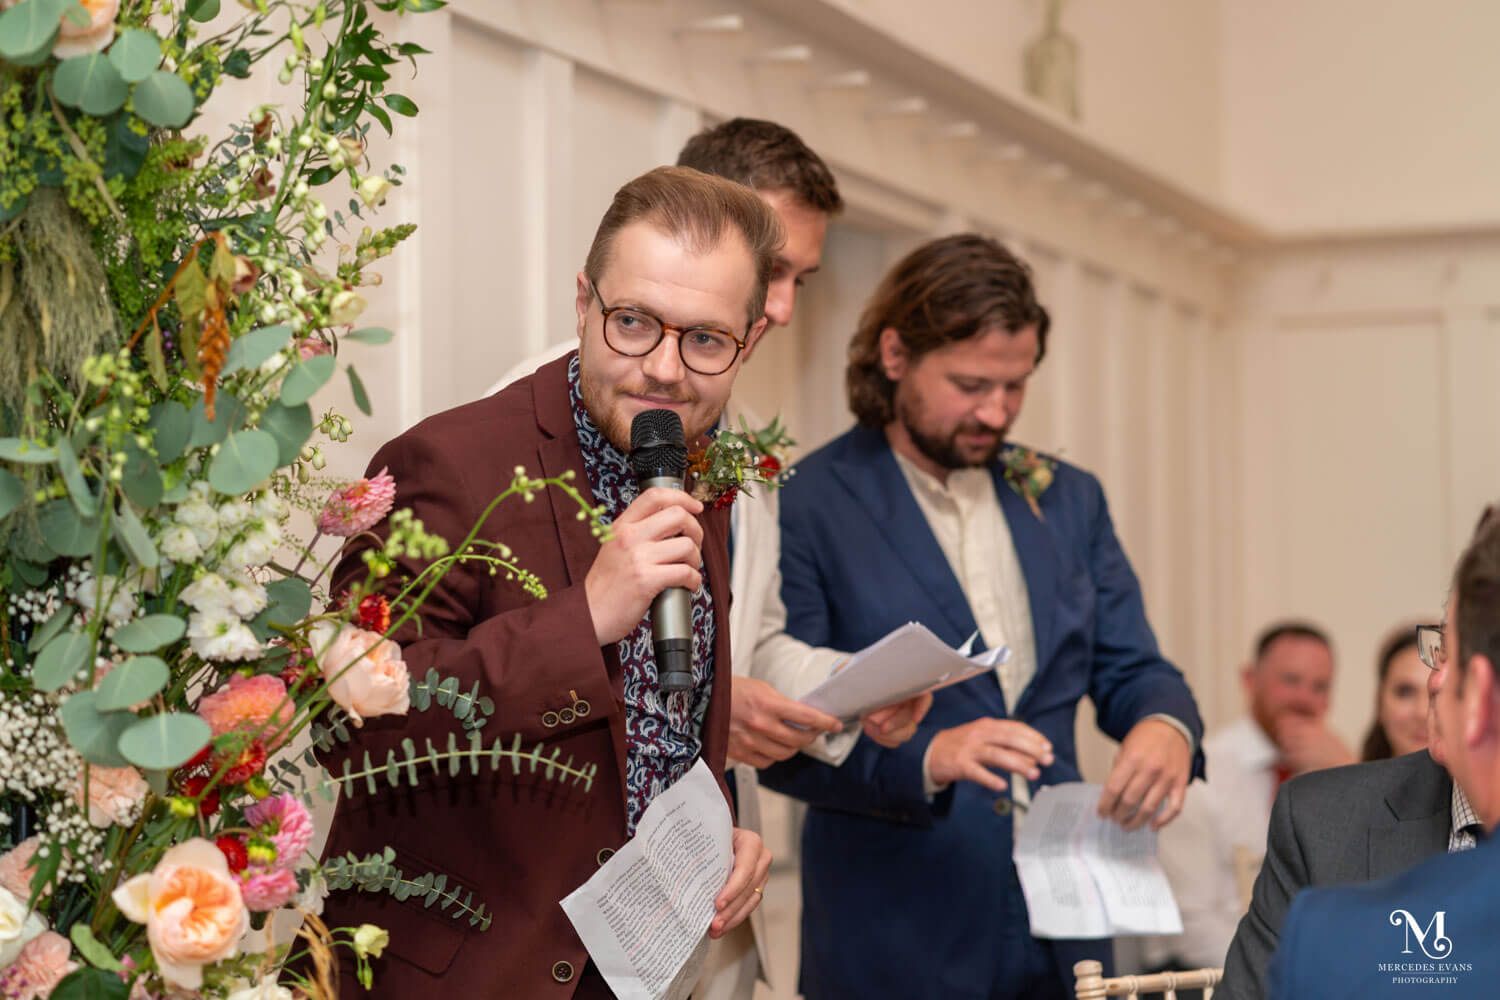 three bestmen are making their speeches, the closest holds the microphone and peers round the foliage, the other two and looking at their papers